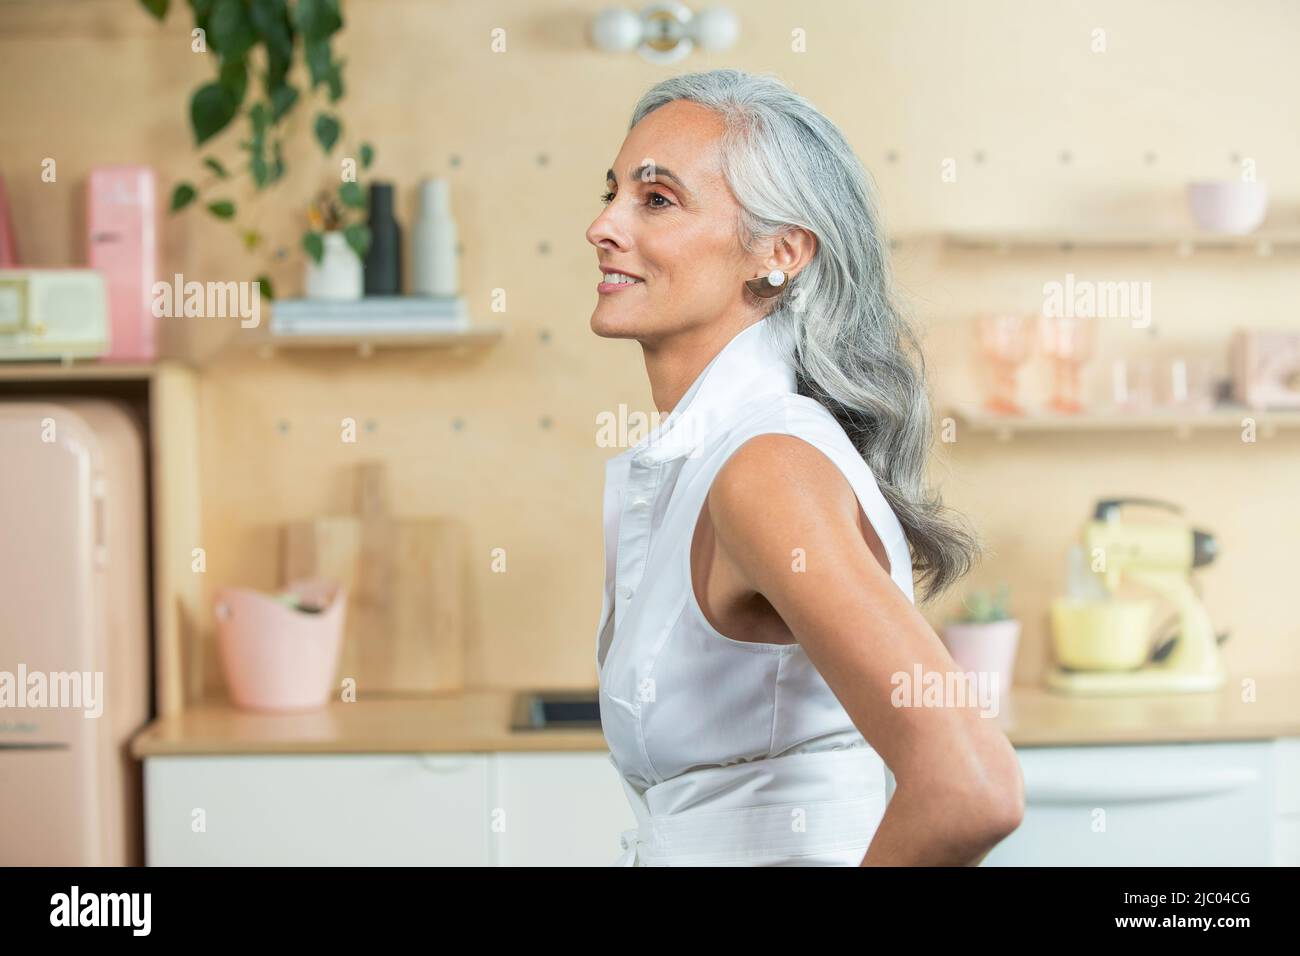 Standing in a modern kitchen, A youthful middle-aged woman with gray hair looks off camera. Stock Photo